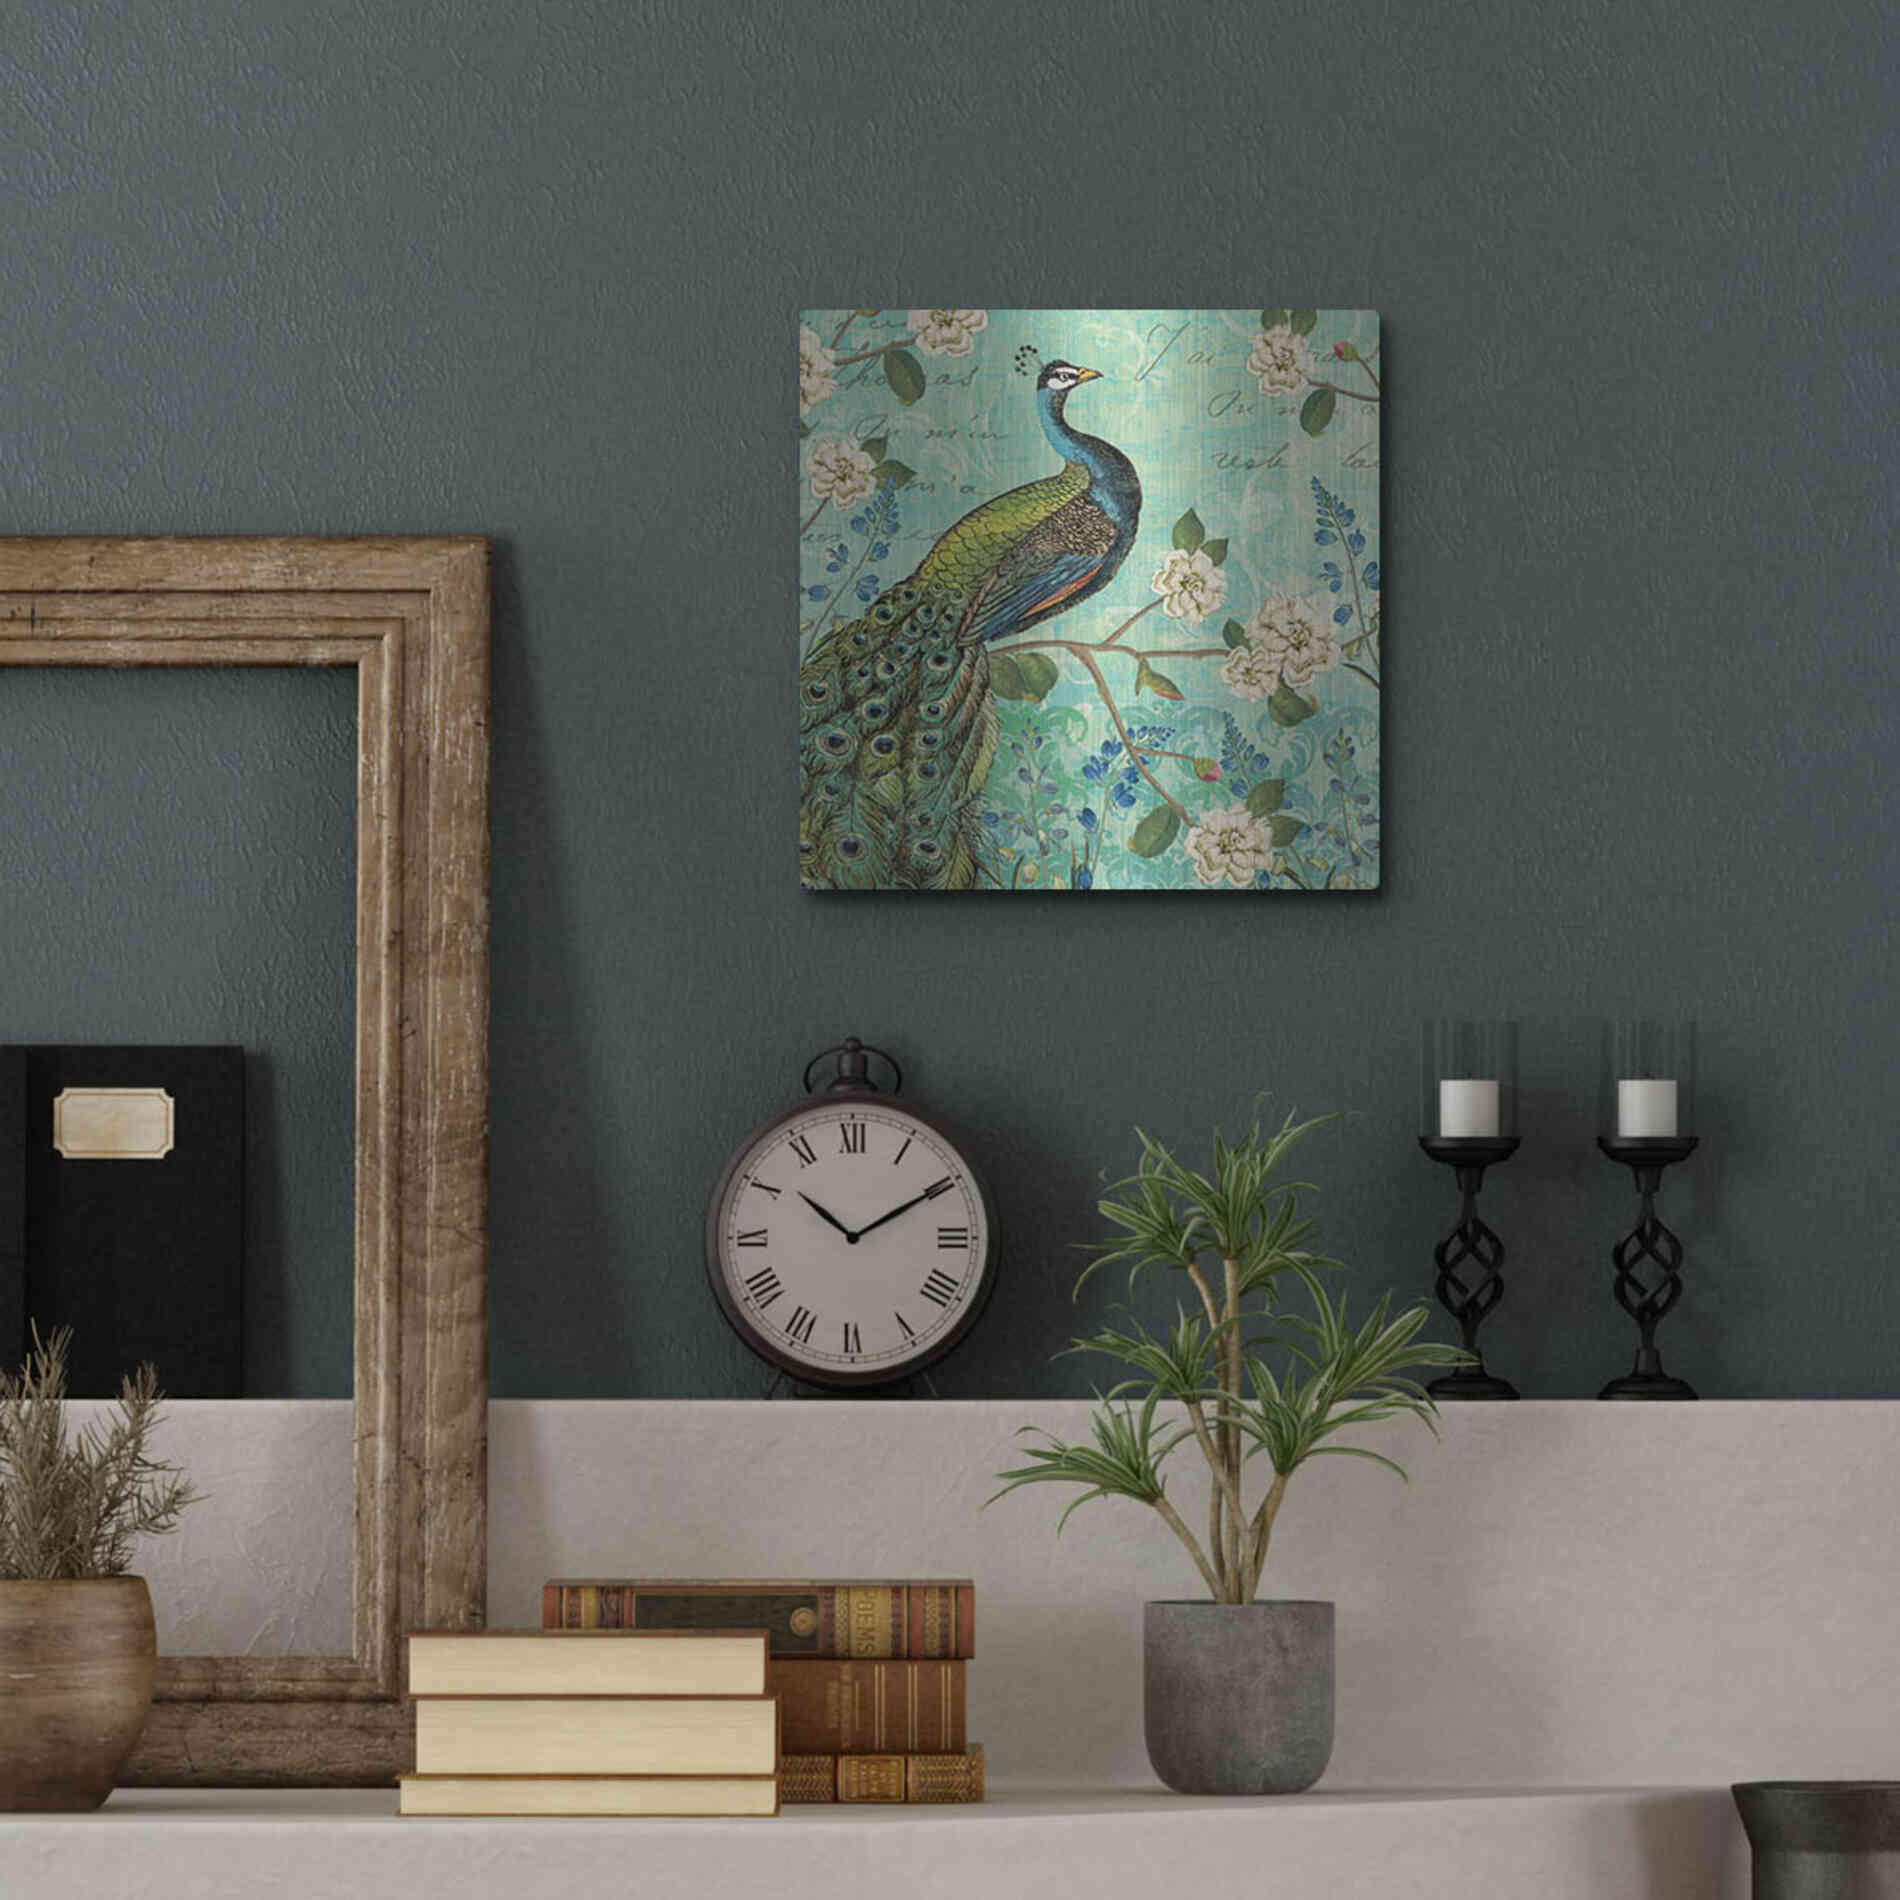 Luxe Metal Art 'Peacock Arbor V Blue' by Sue Schlabach, Metal Wall Art,12x12